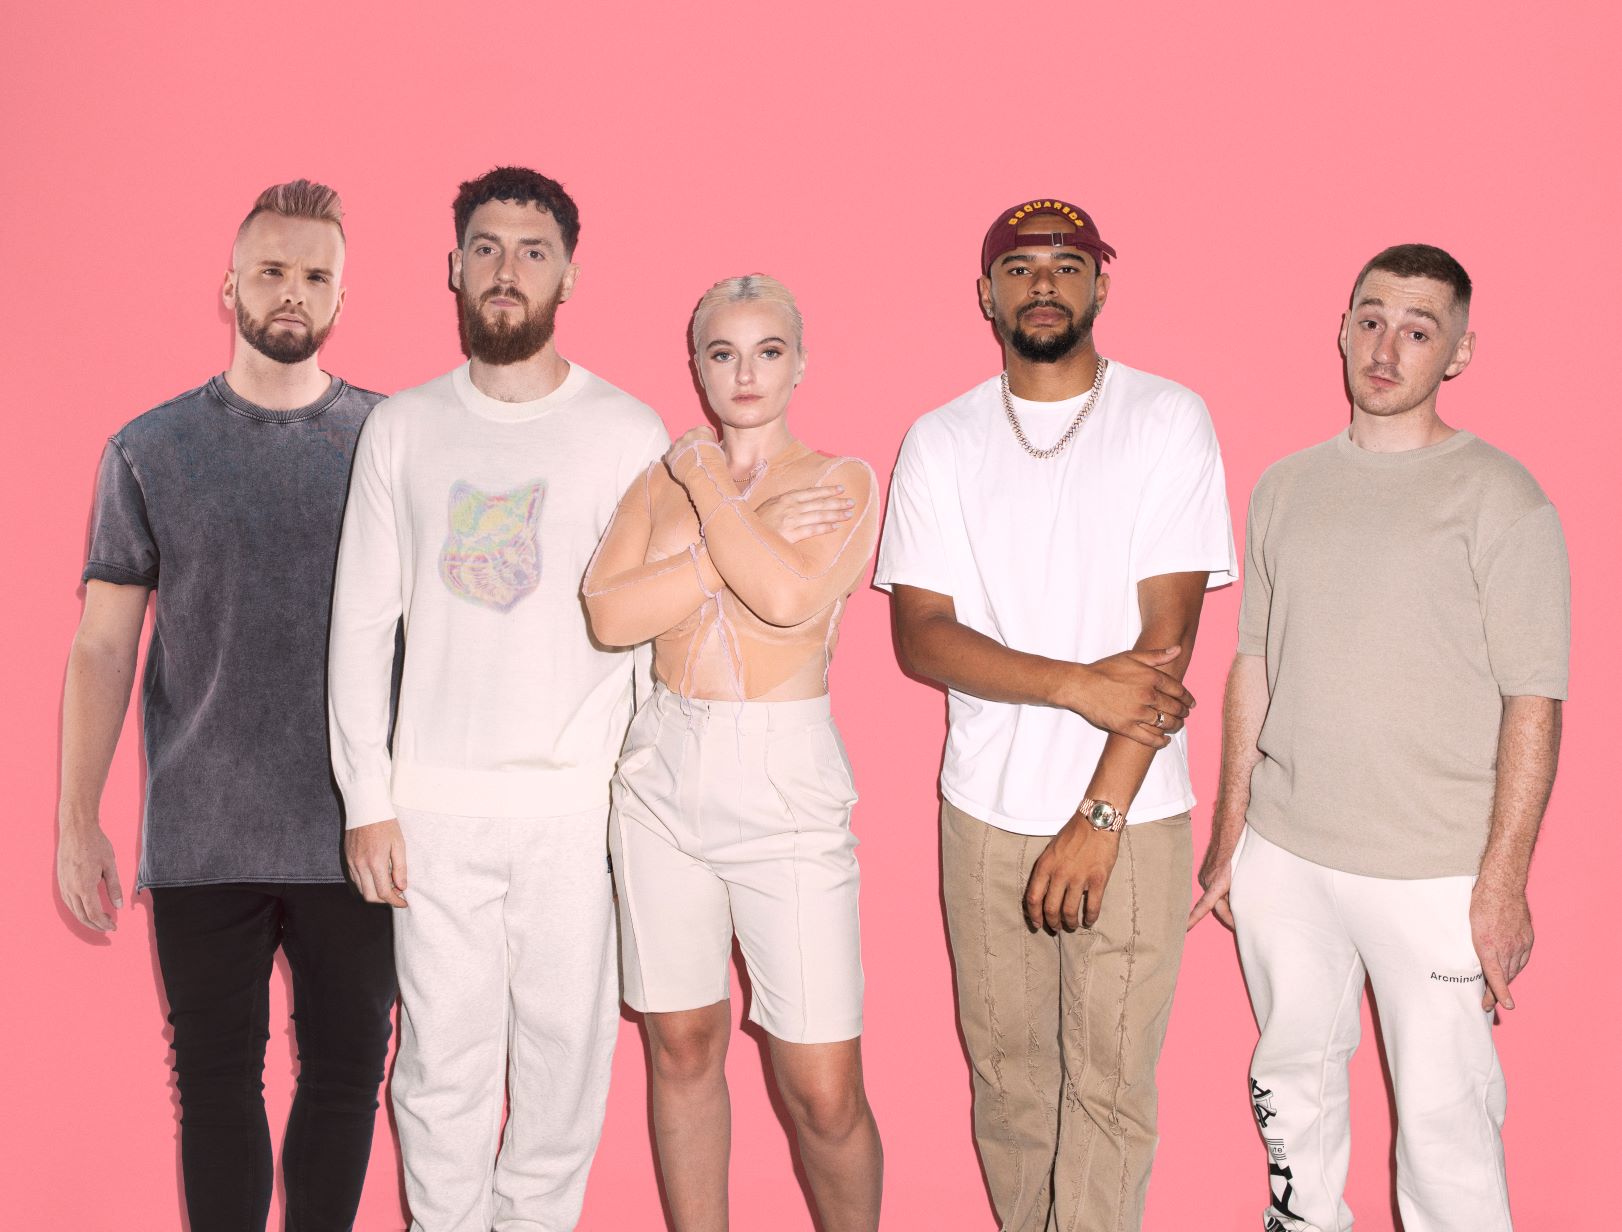 CLEAN BANDIT X TOPIC UNVEIL ‘DRIVE’ FEATURING WES NELSON